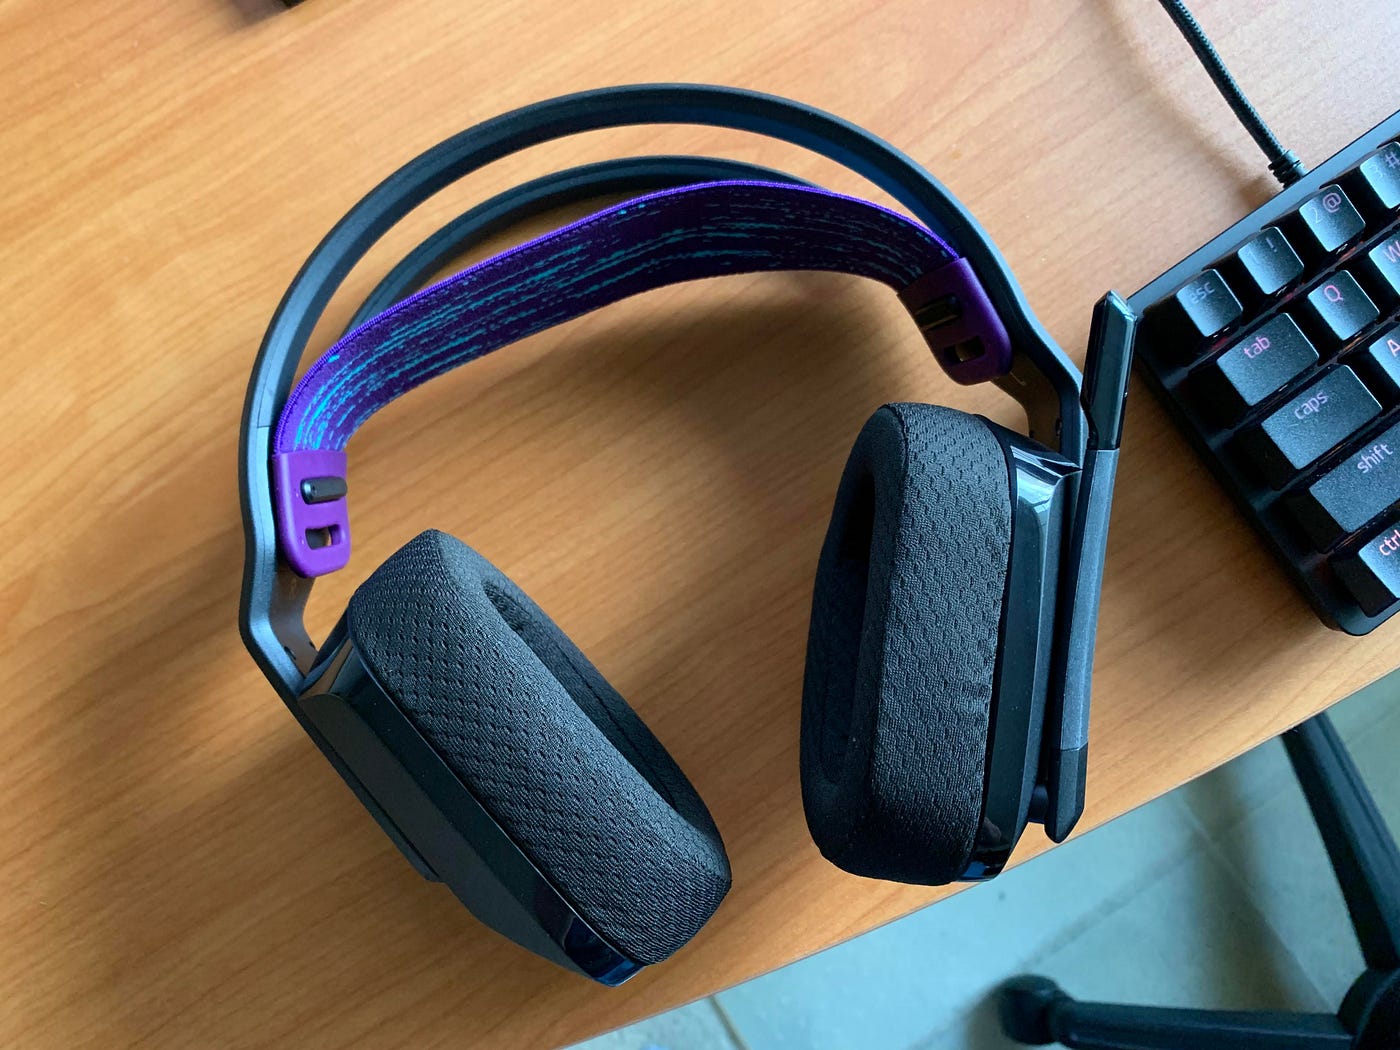 Logitech G733 Wireless Gaming Headset Review, by Alex Rowe